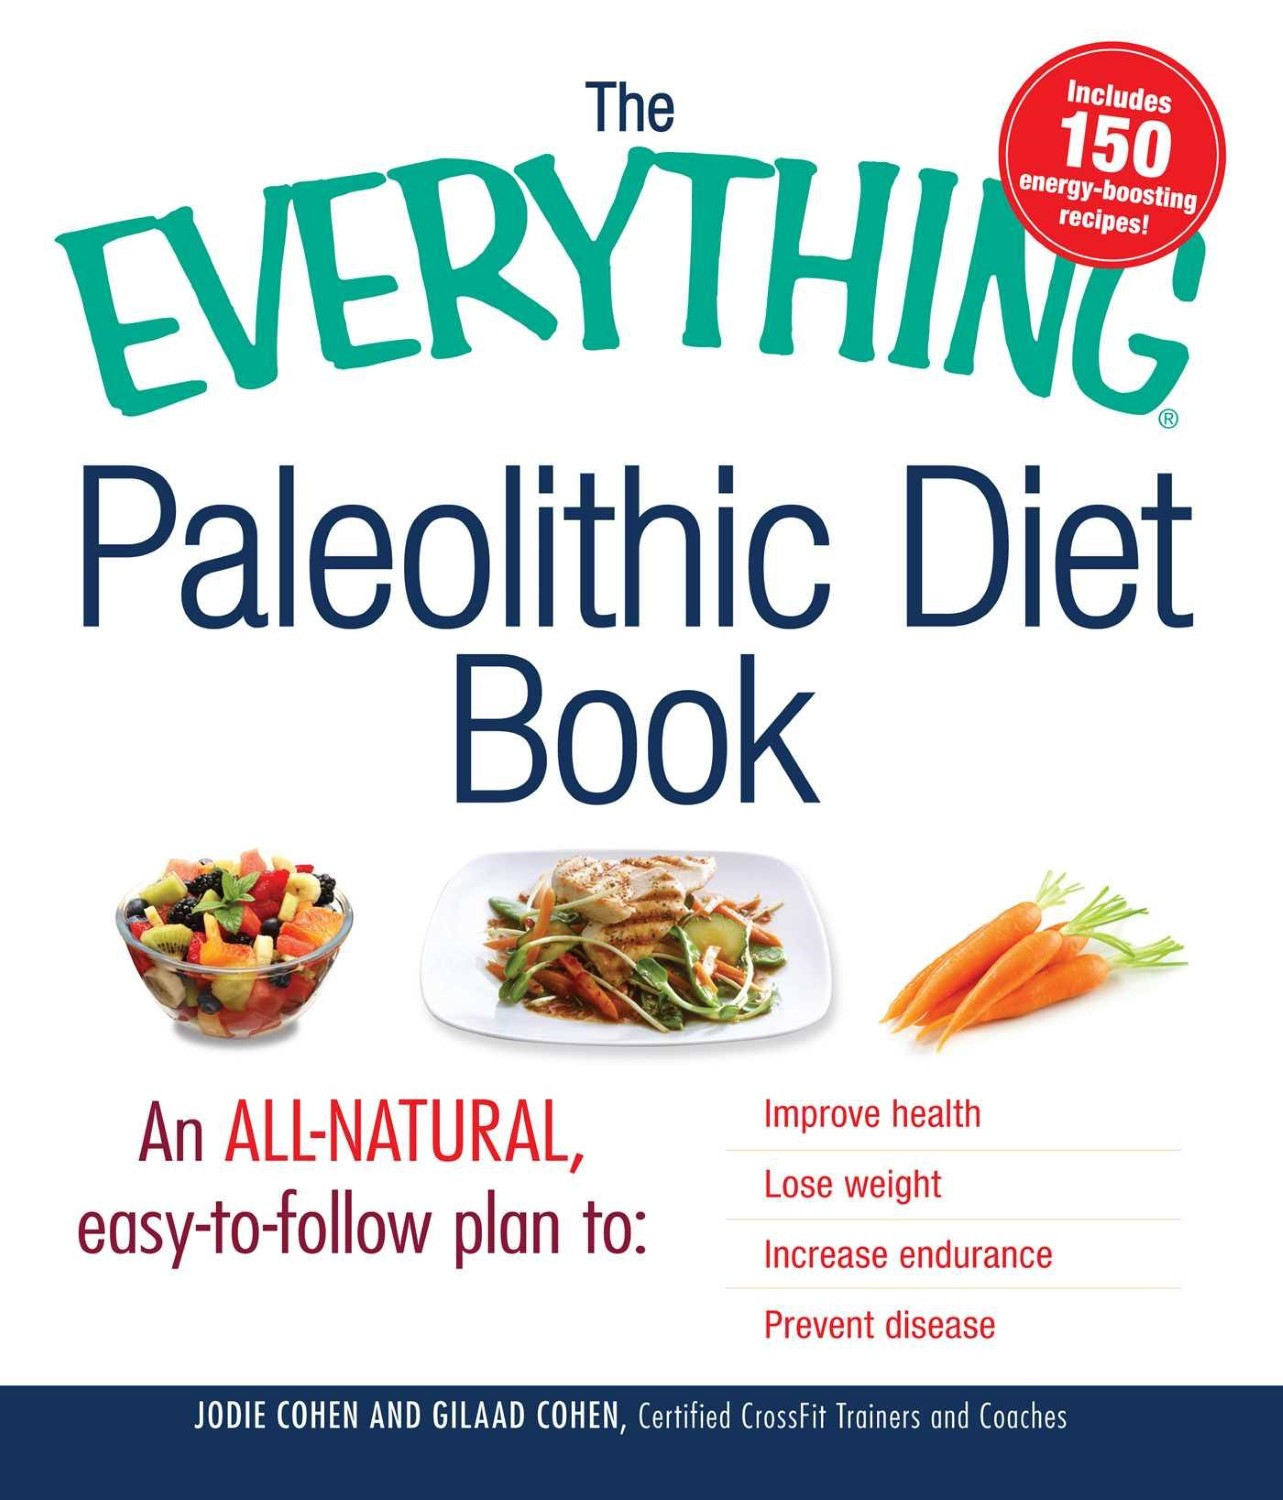 The Paleo Diet Book
 The Everything Paleolithic Diet Book